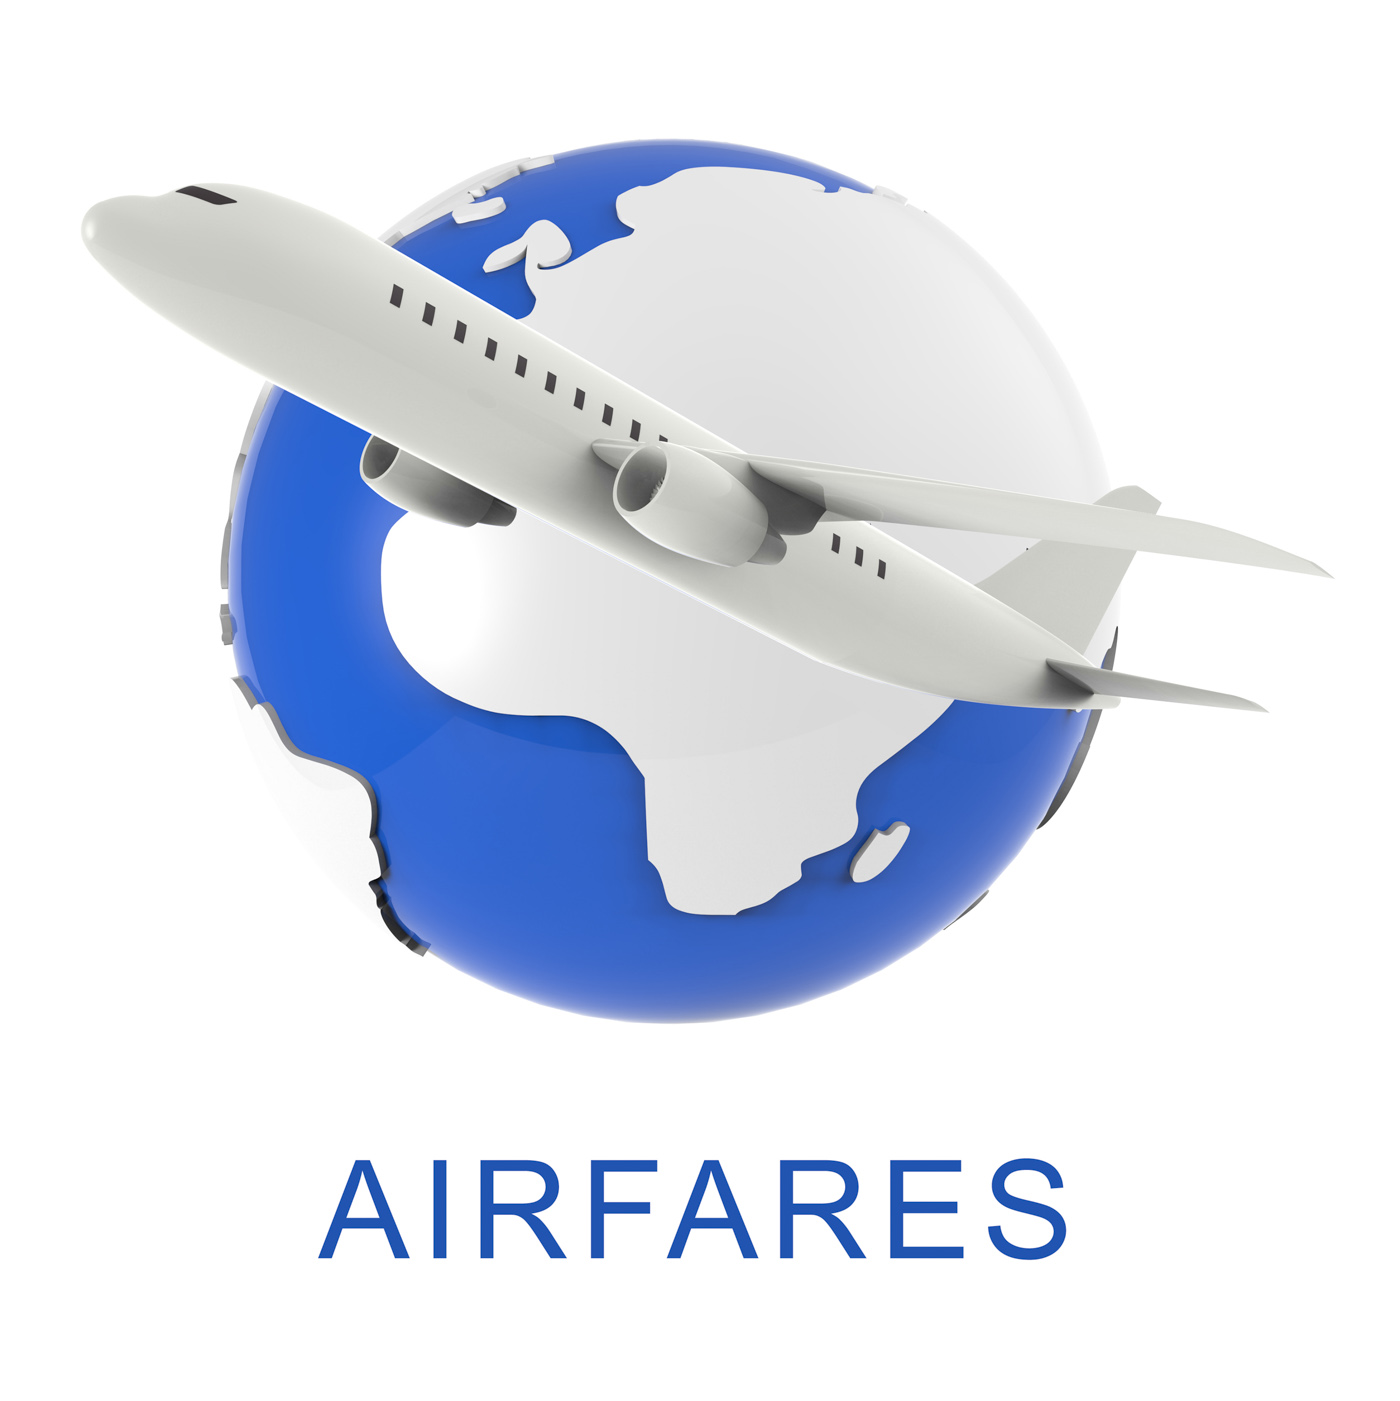 Flight airfares means aircraft prices and travel 3d rendering photo